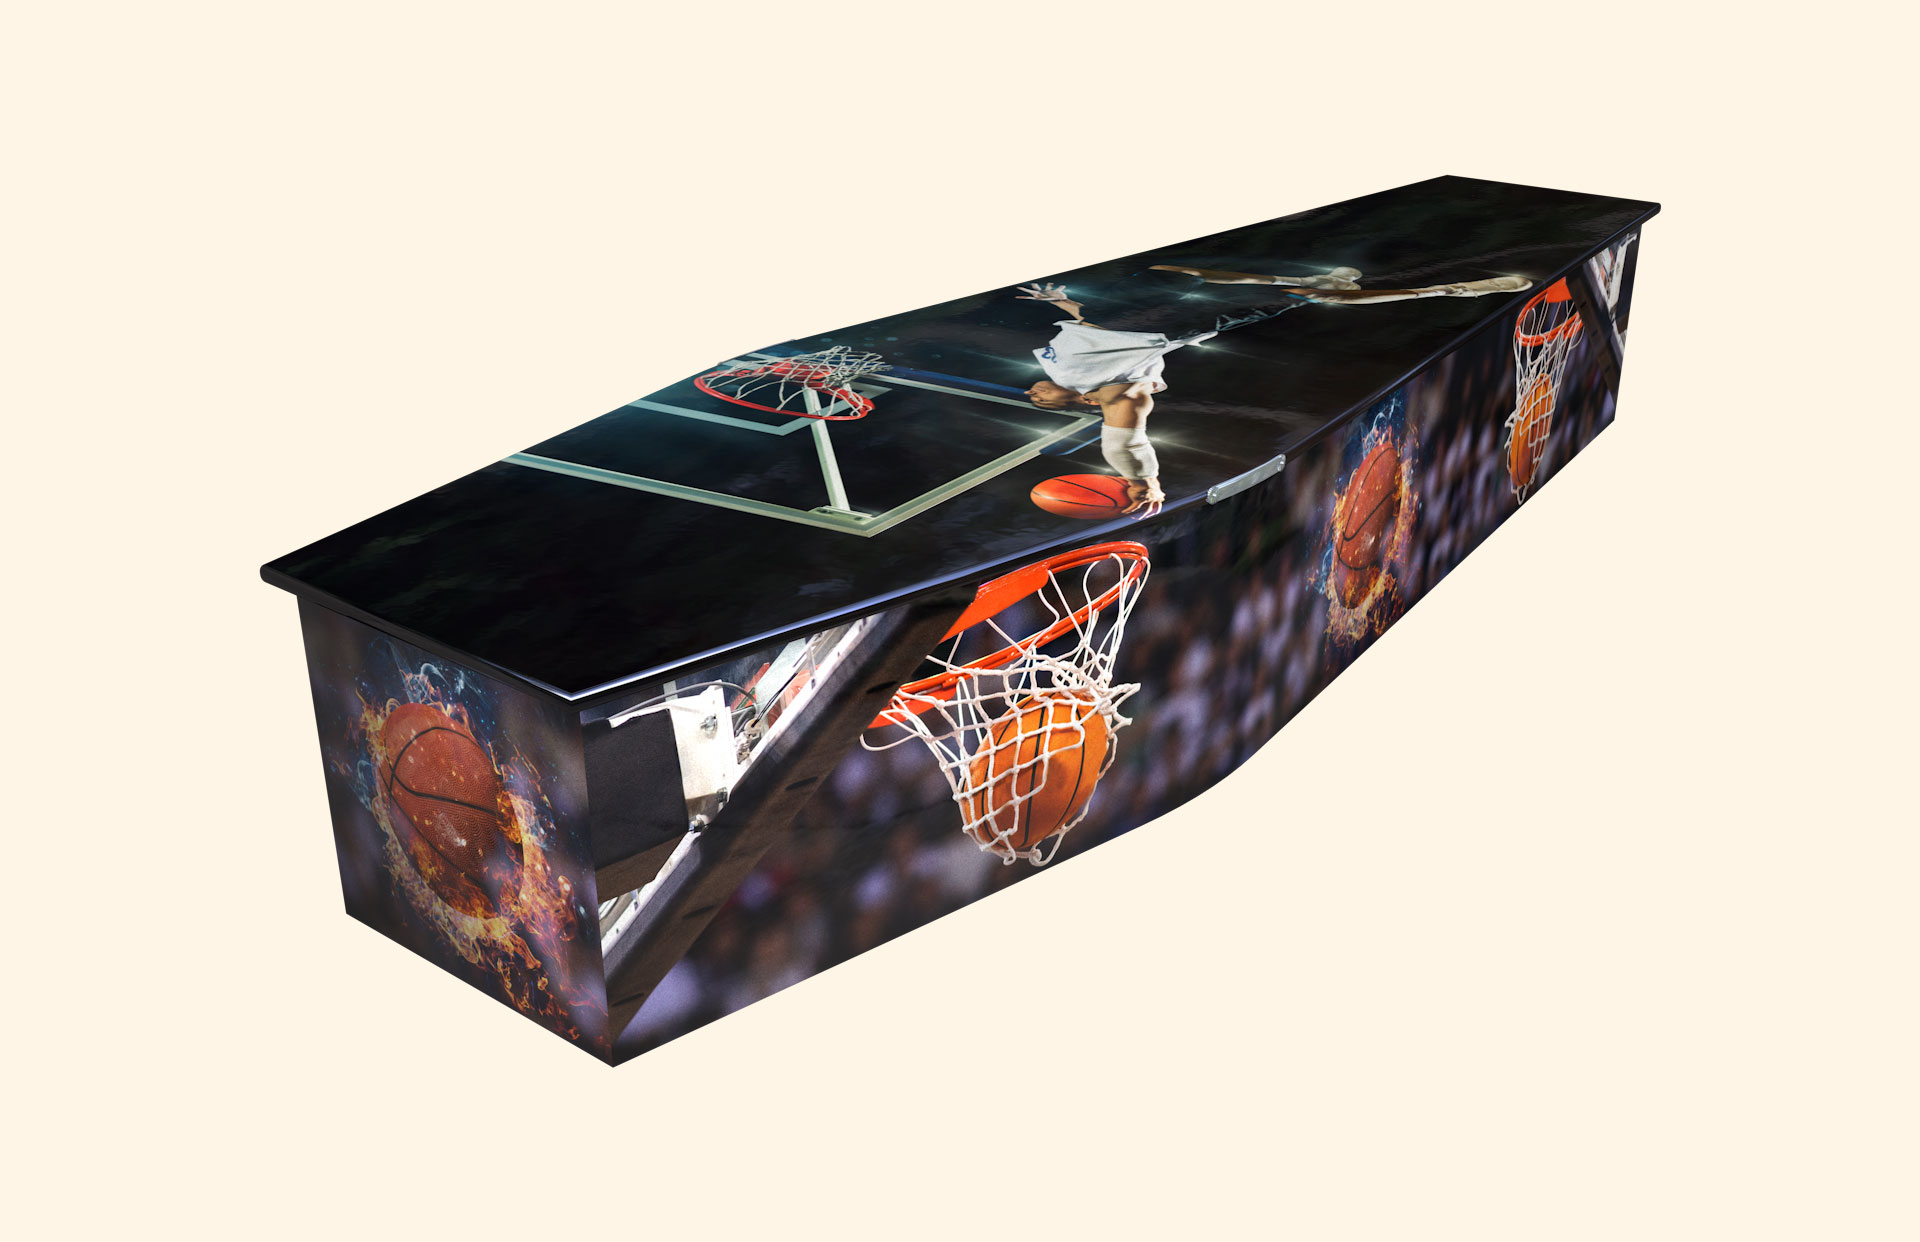 Slam Dunk design on a traditional coffin